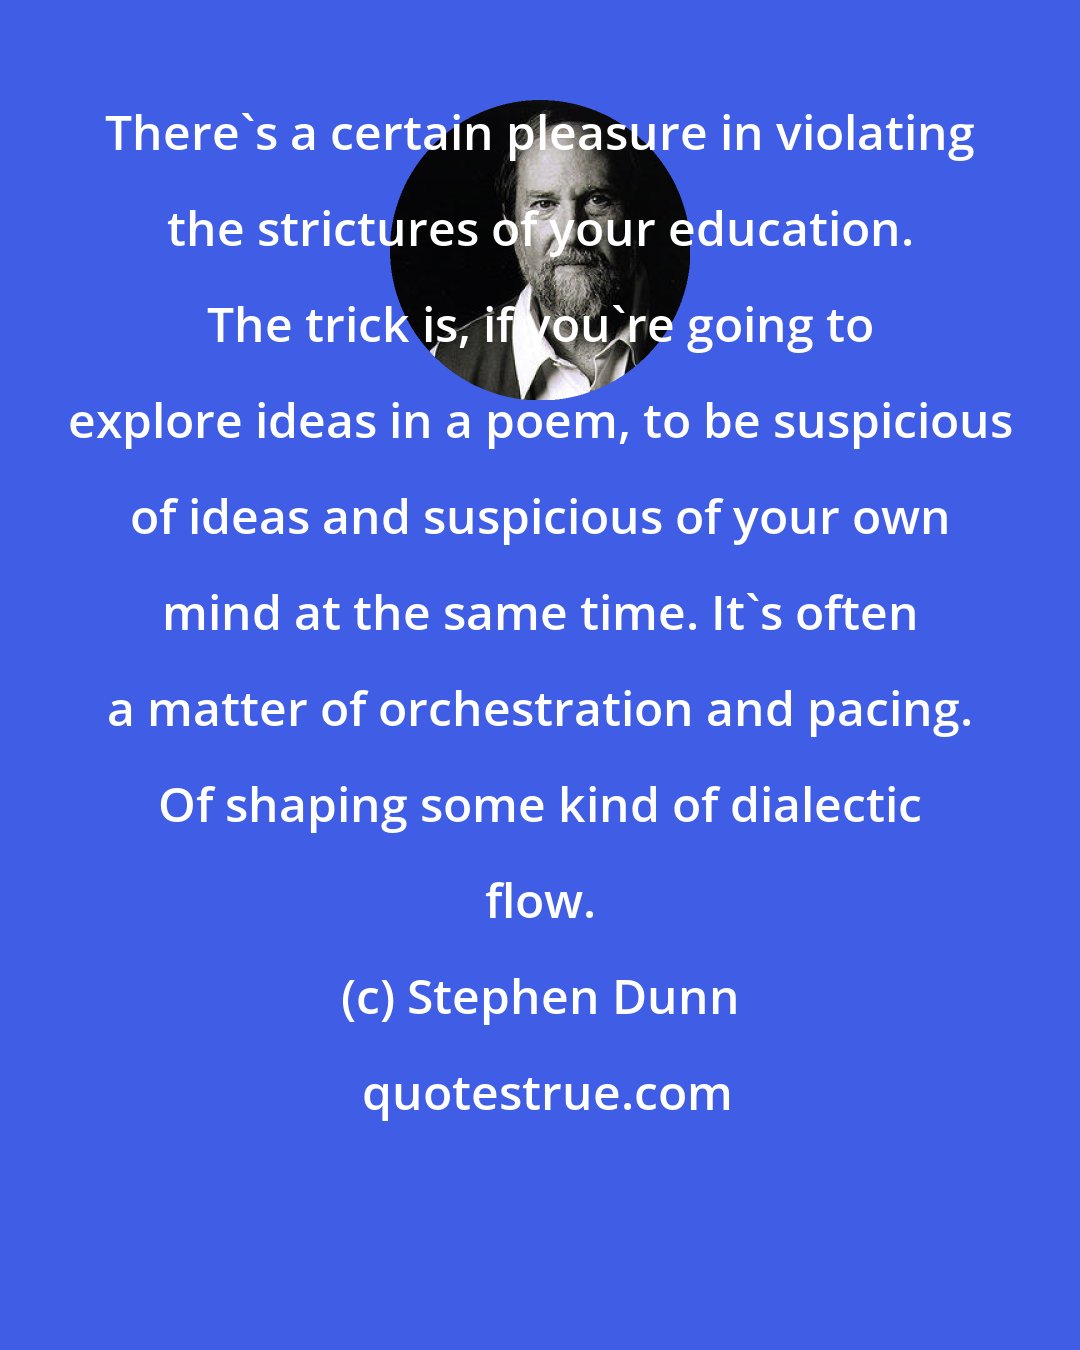 Stephen Dunn: There's a certain pleasure in violating the strictures of your education. The trick is, if you're going to explore ideas in a poem, to be suspicious of ideas and suspicious of your own mind at the same time. It's often a matter of orchestration and pacing. Of shaping some kind of dialectic flow.